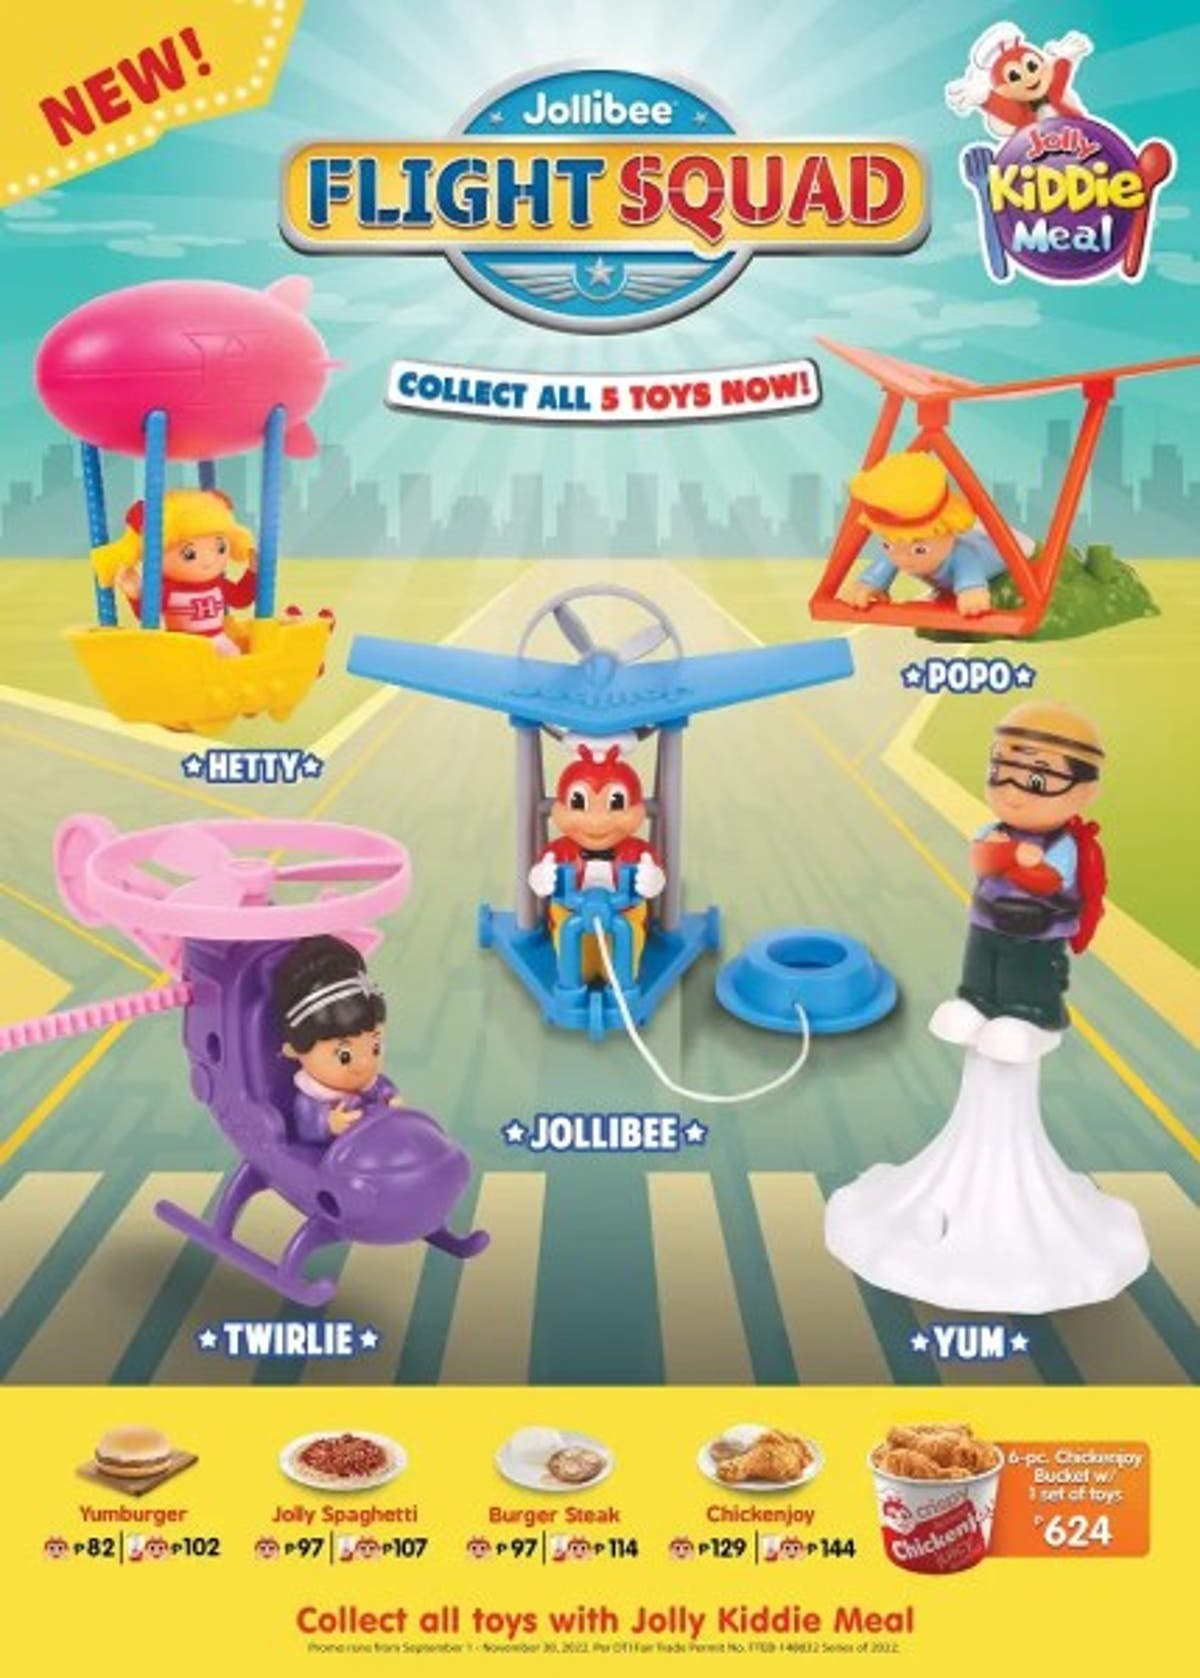 New Jollibee Flight Squad Jolly Kiddie Meal Toys Now Available | Starmometer